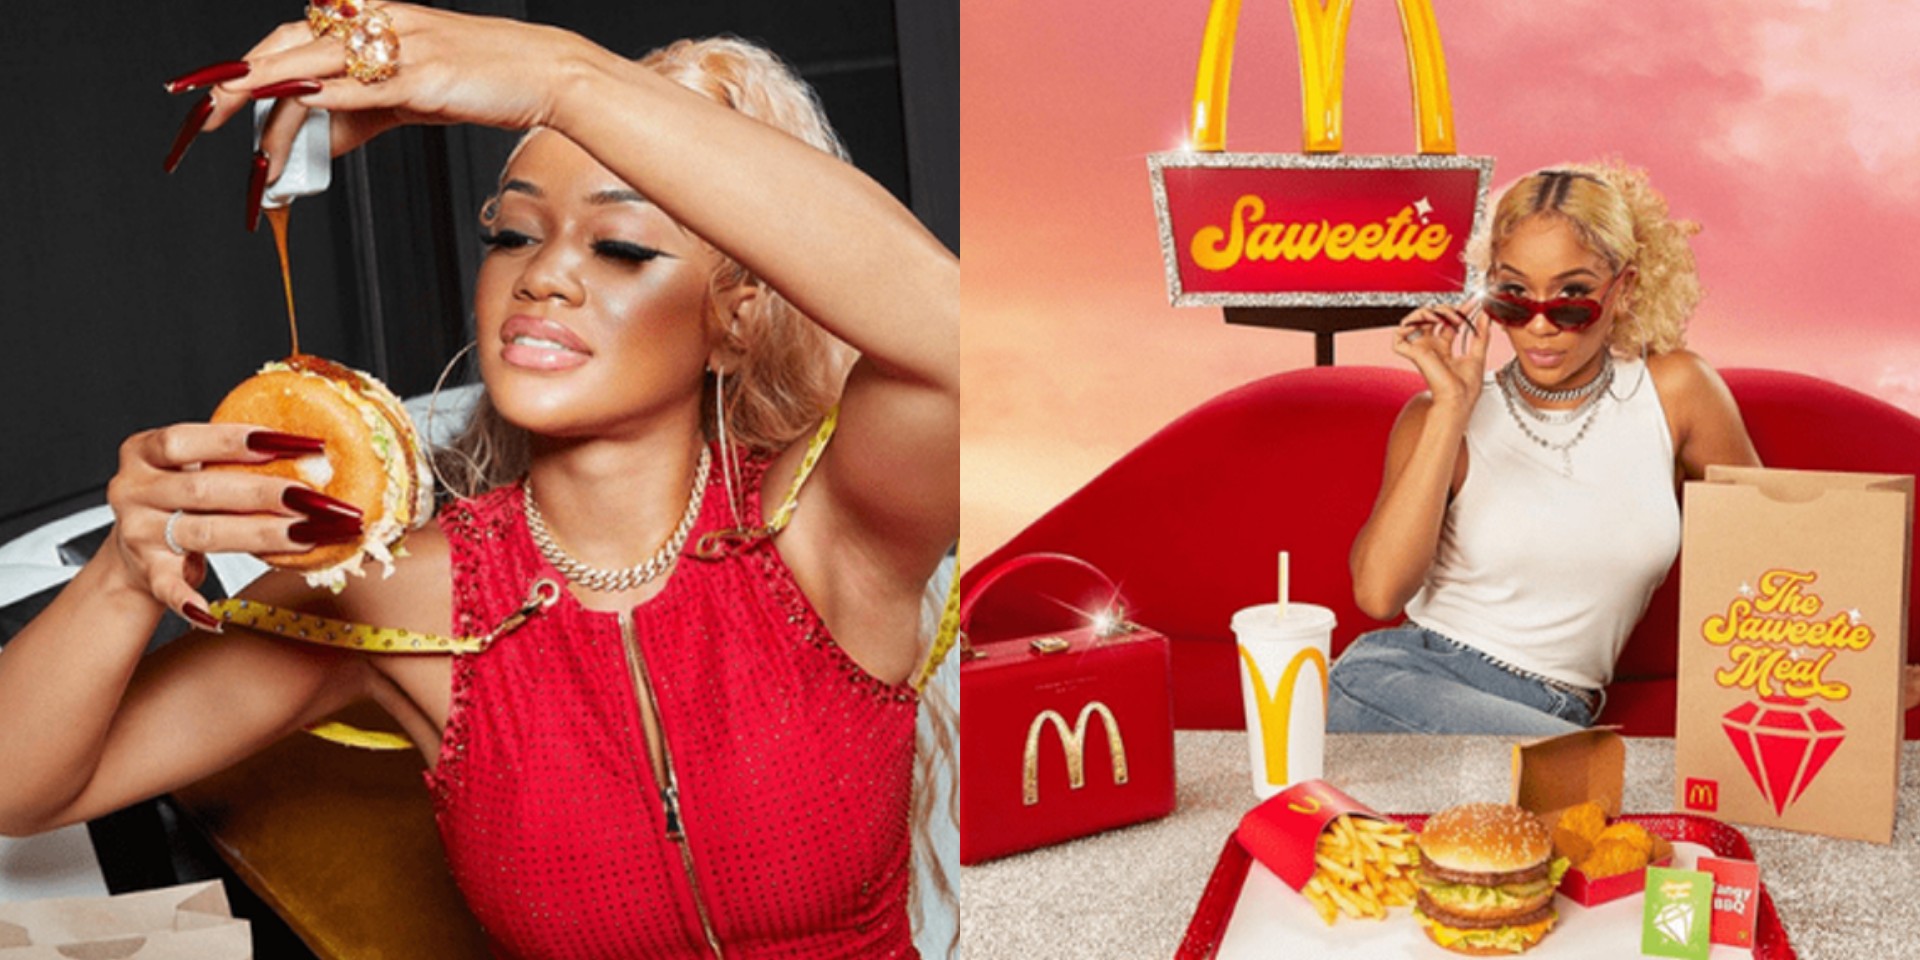 Saweetie to launch 'The Saweetie Meal' in the US